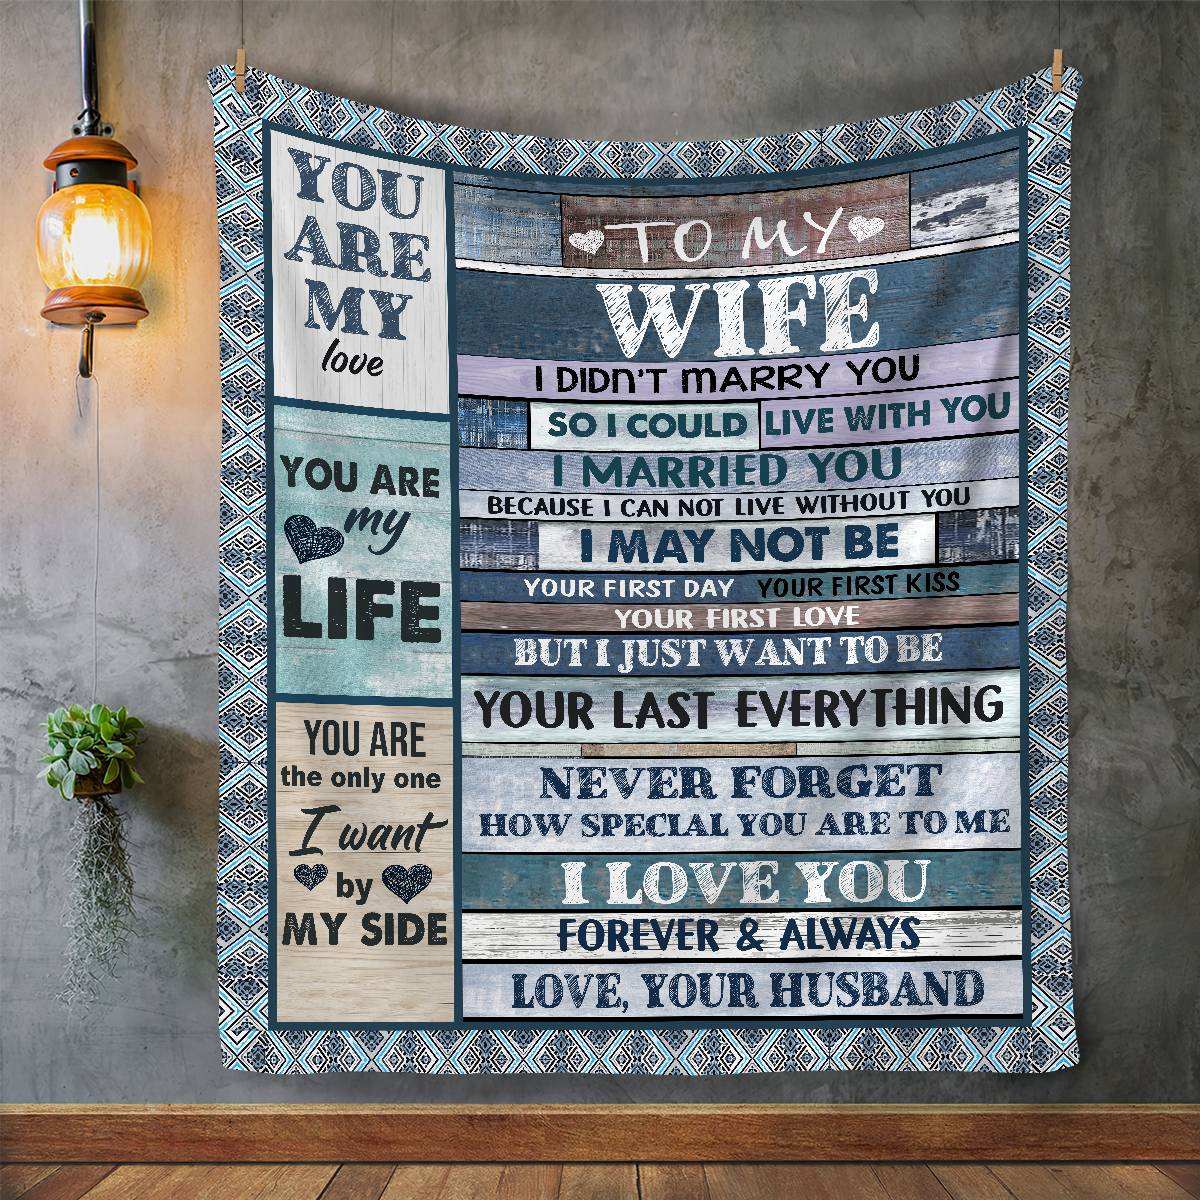 Gift For Wife | Last Everything Throw Blanket 50x60 From Husband